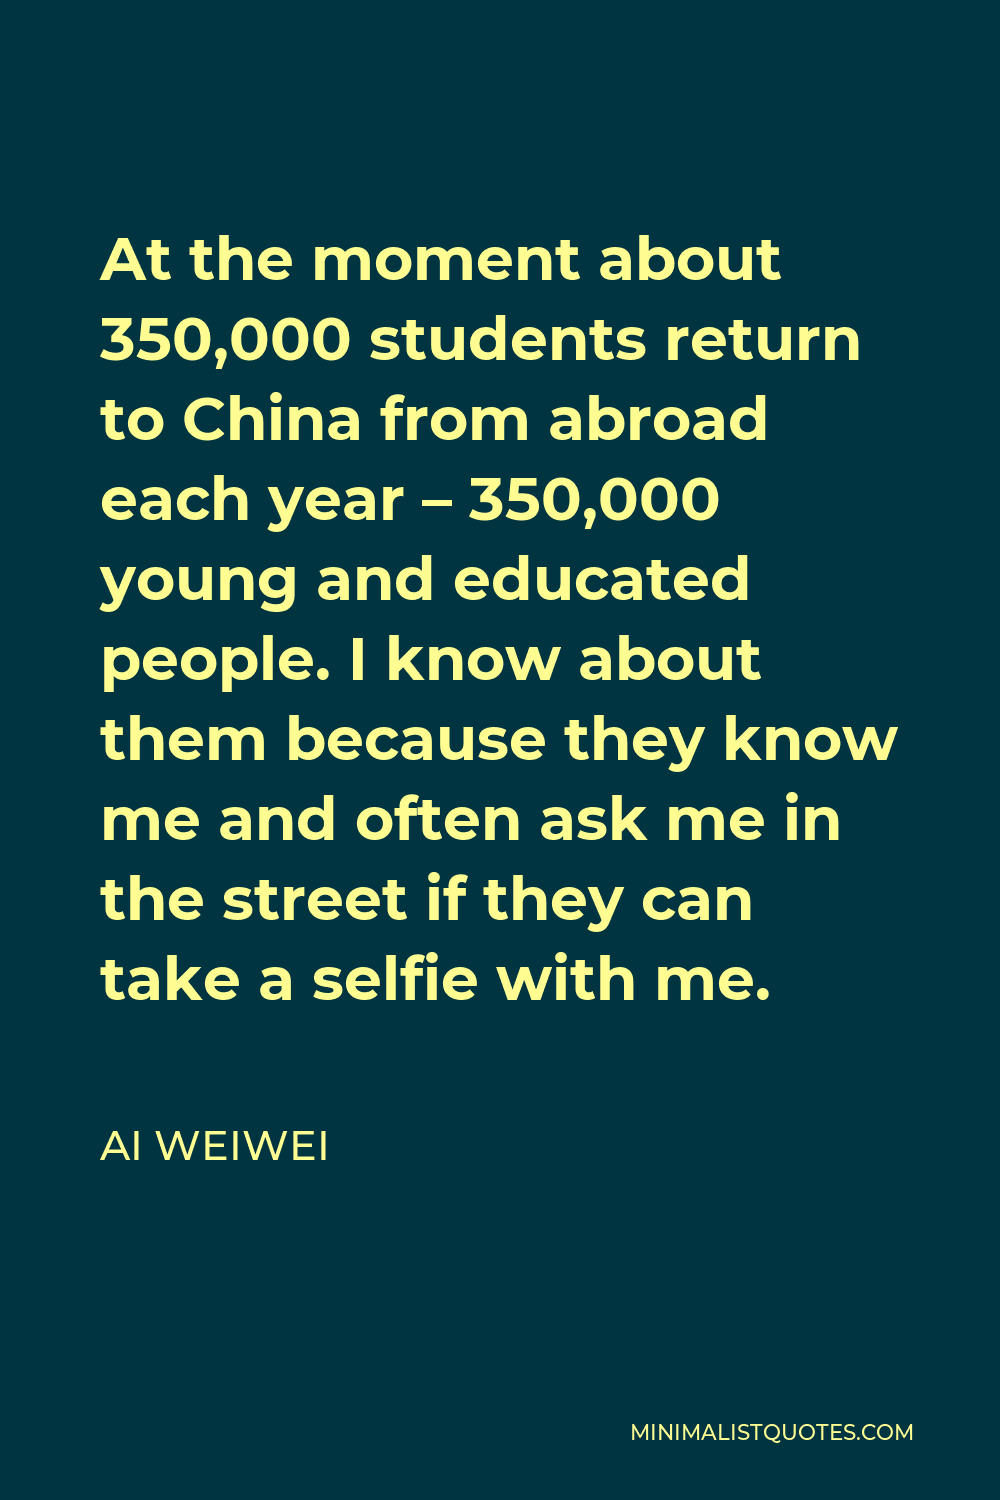 Ai Weiwei Quote - At the moment about 350,000 students return to China from abroad each year – 350,000 young and educated people. I know about them because they know me and often ask me in the street if they can take a selfie with me.